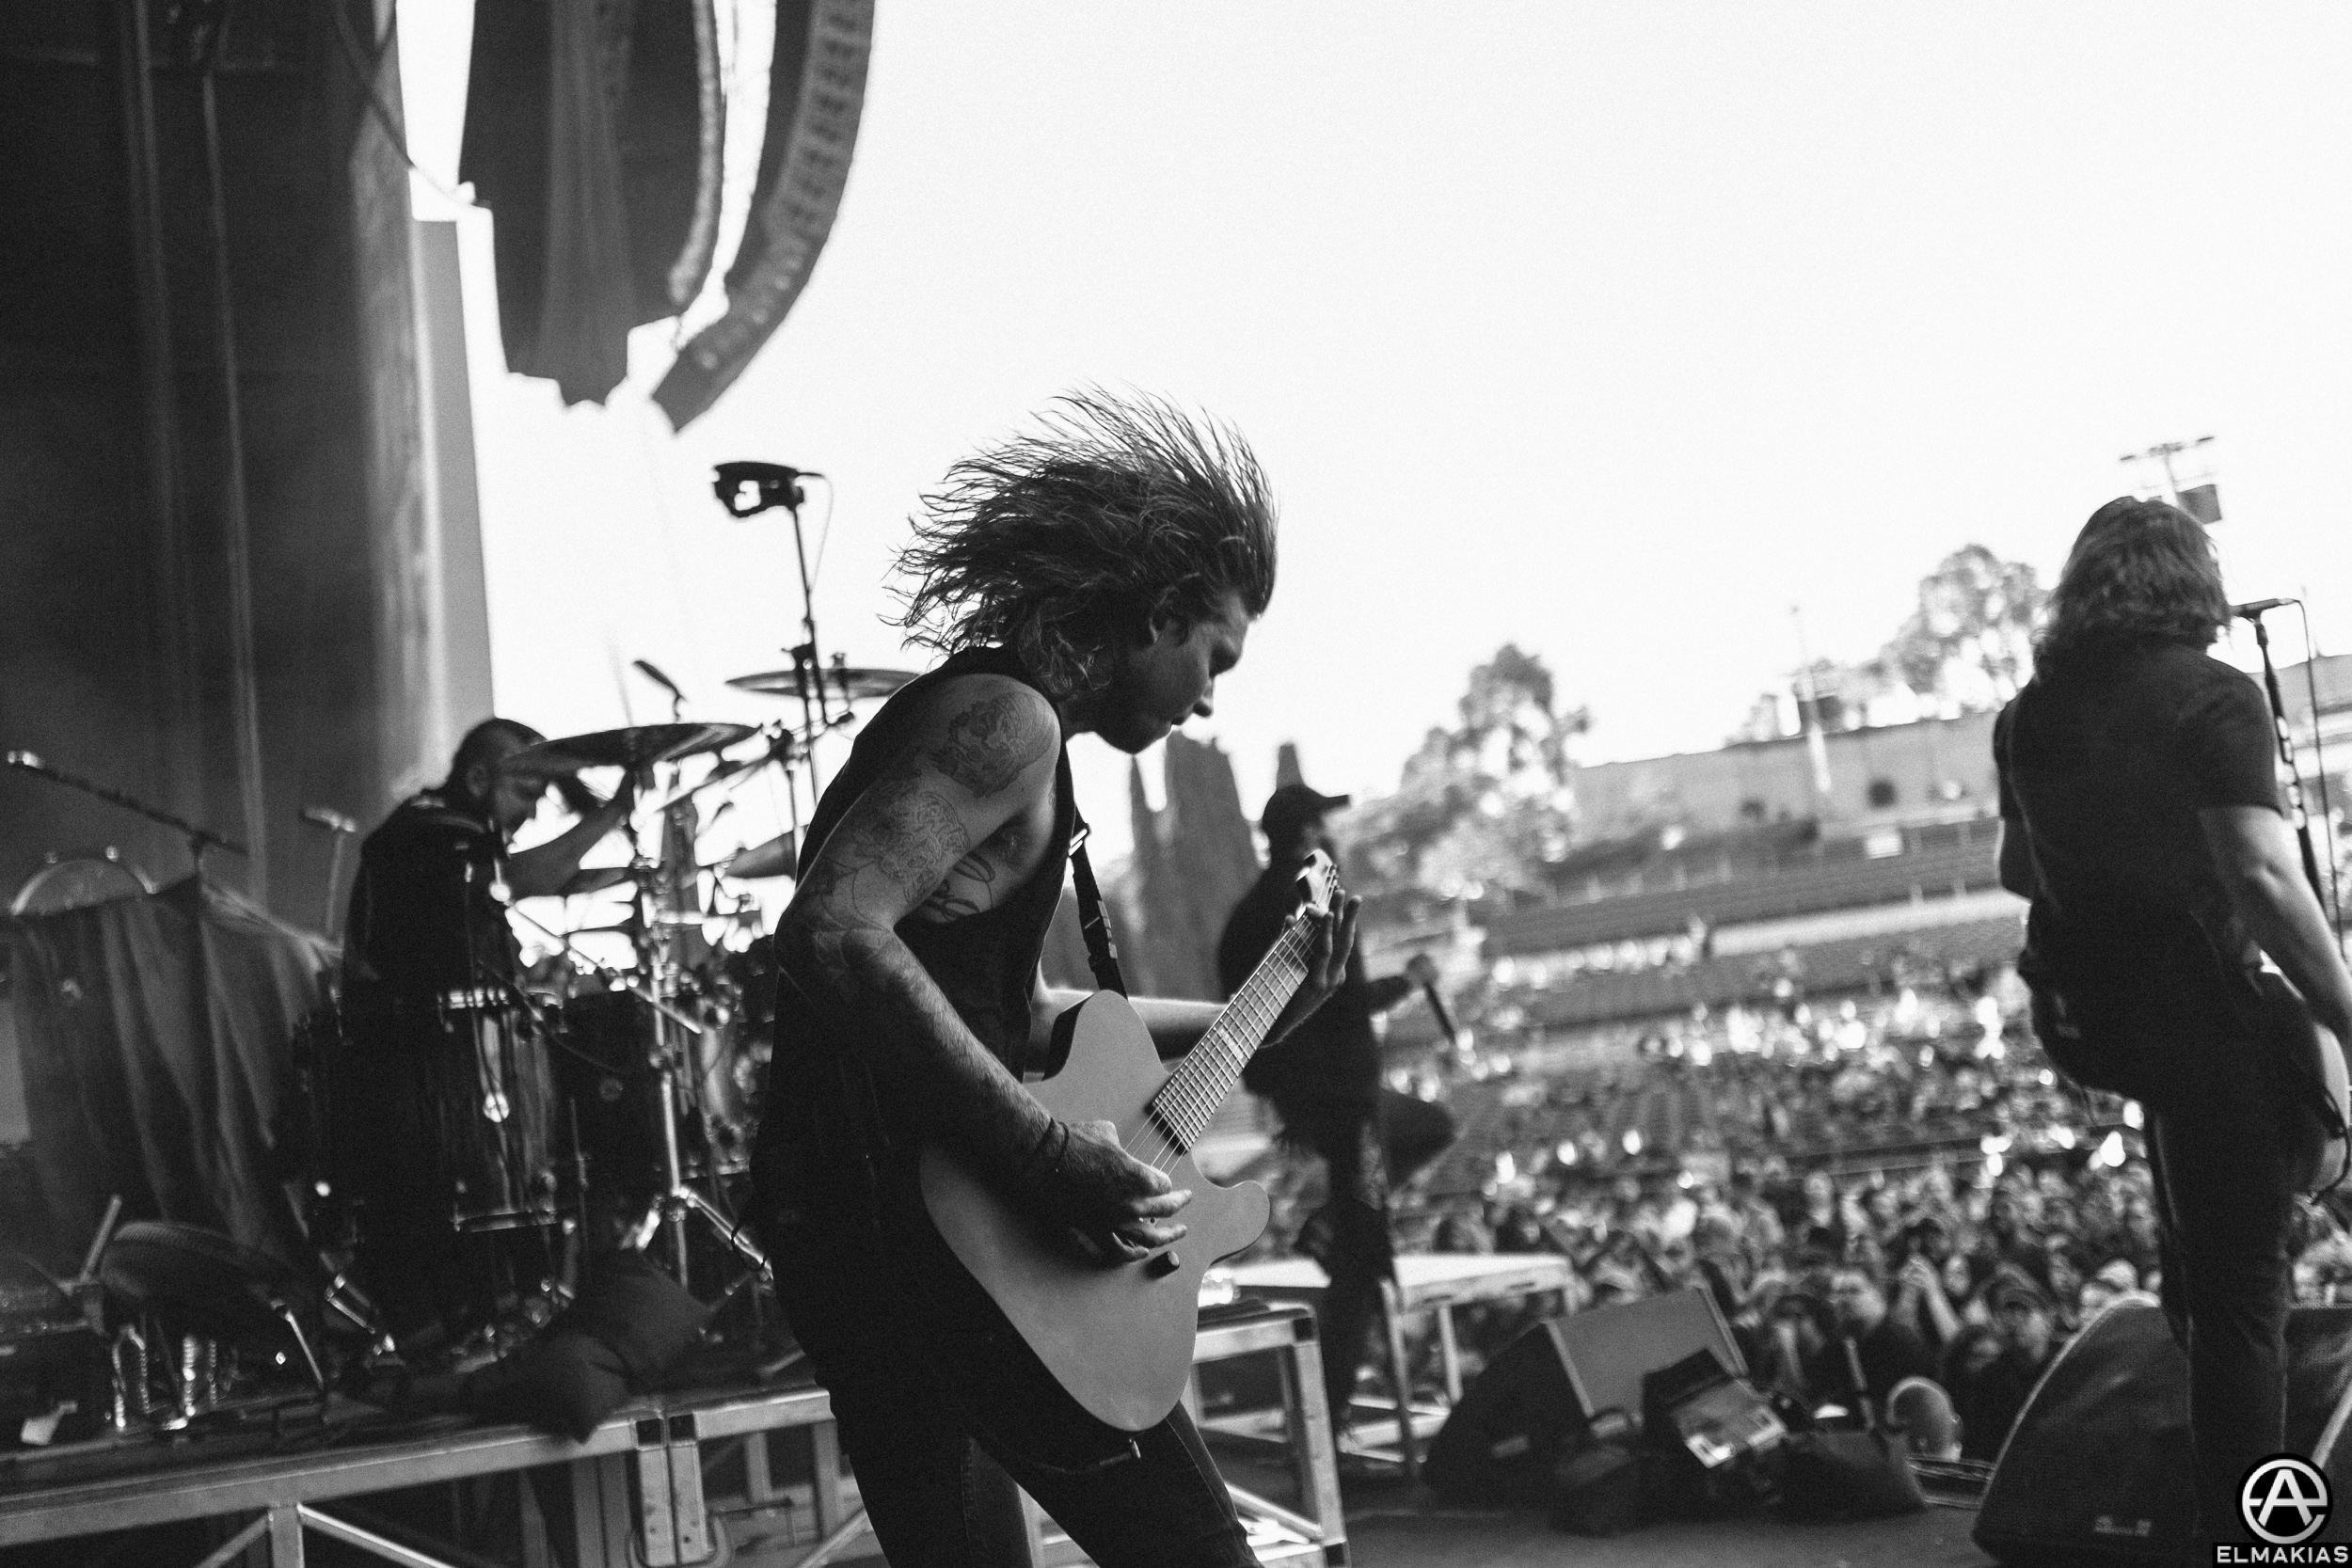 Alan Ashby of Of Mice & Men photographed with the Sigma 24-35 ART f/2.0